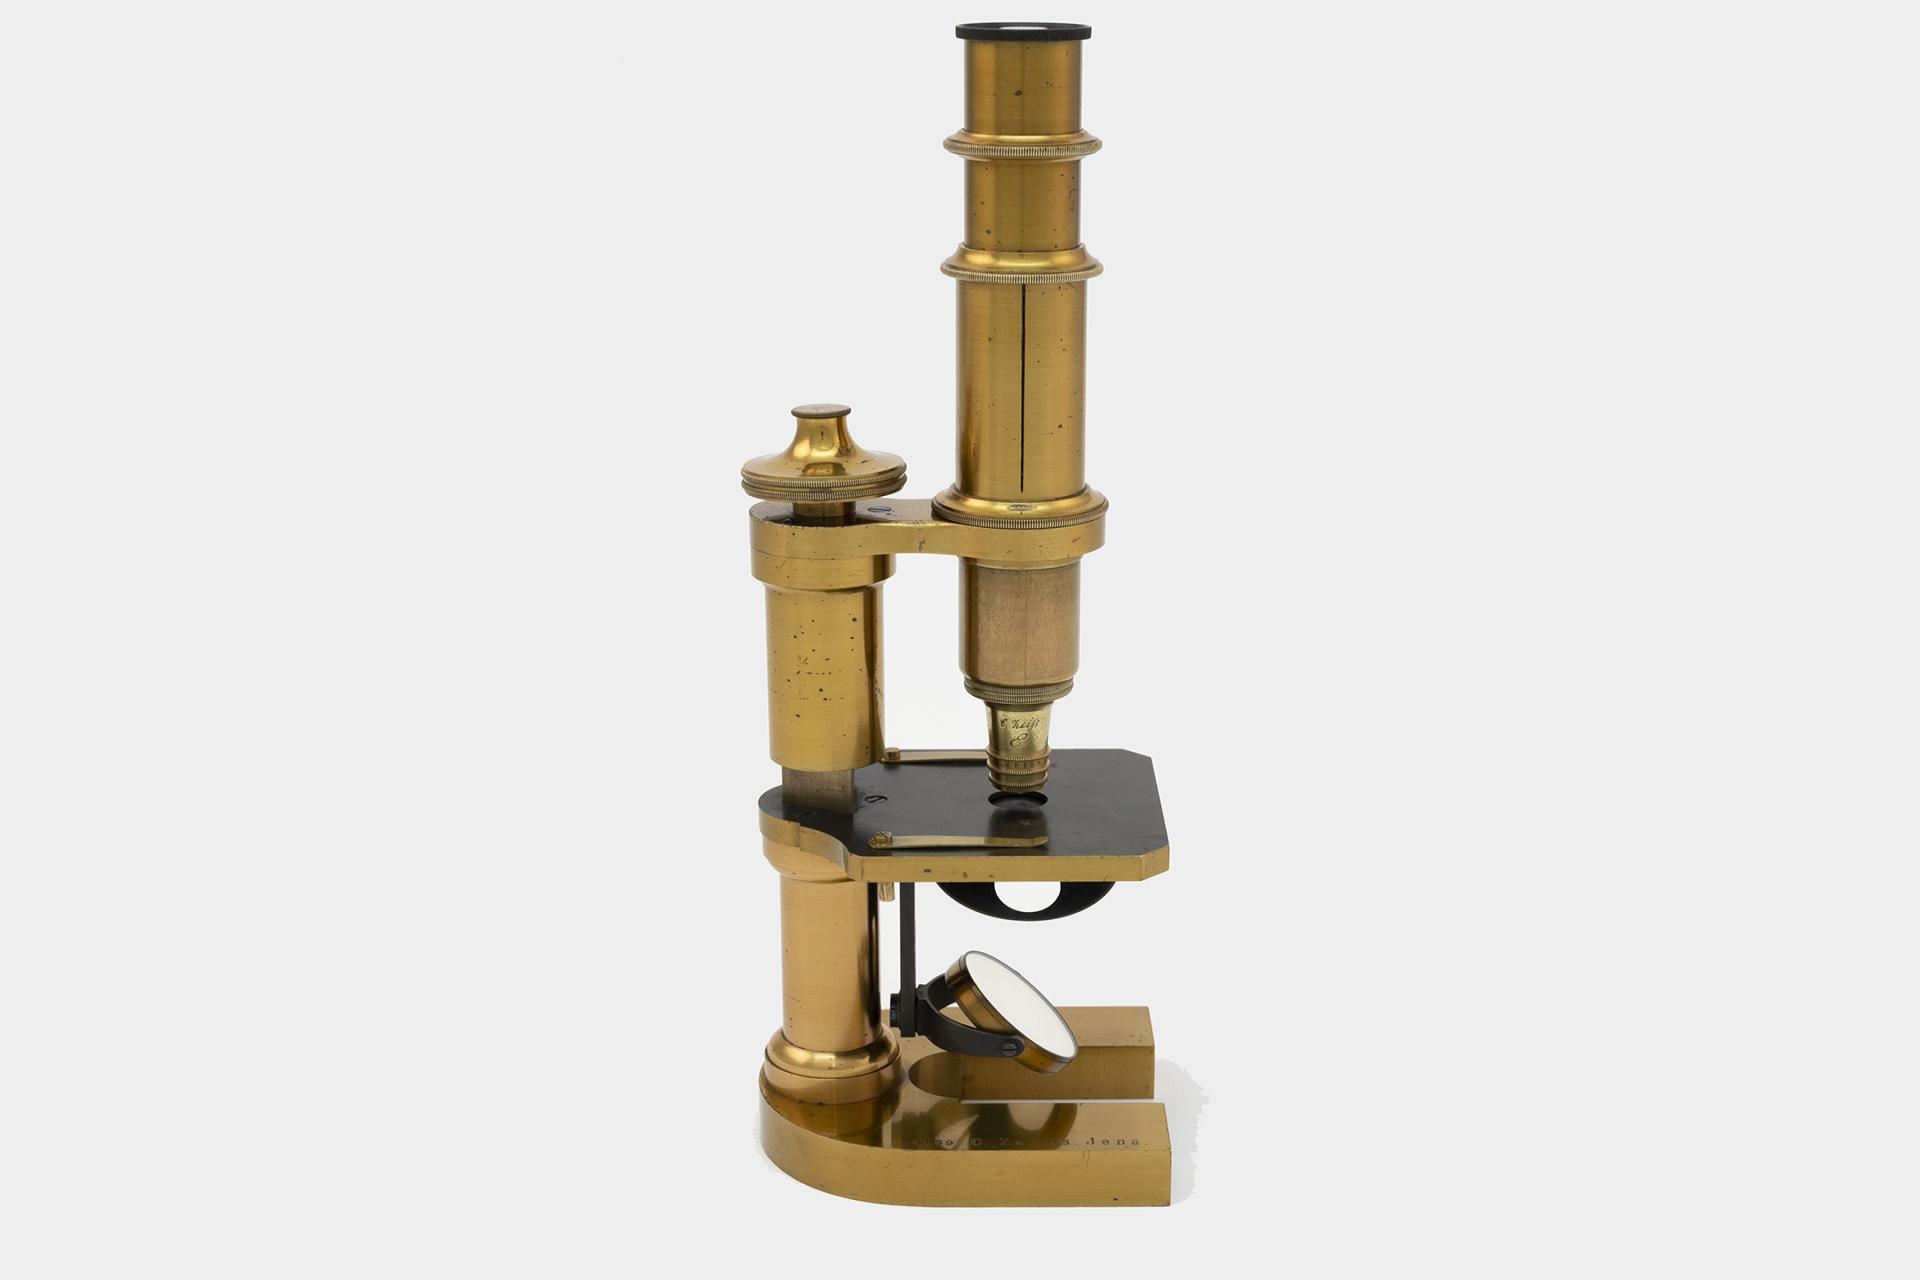 The ZEISS microscope "Stand VIIb" from 1879.